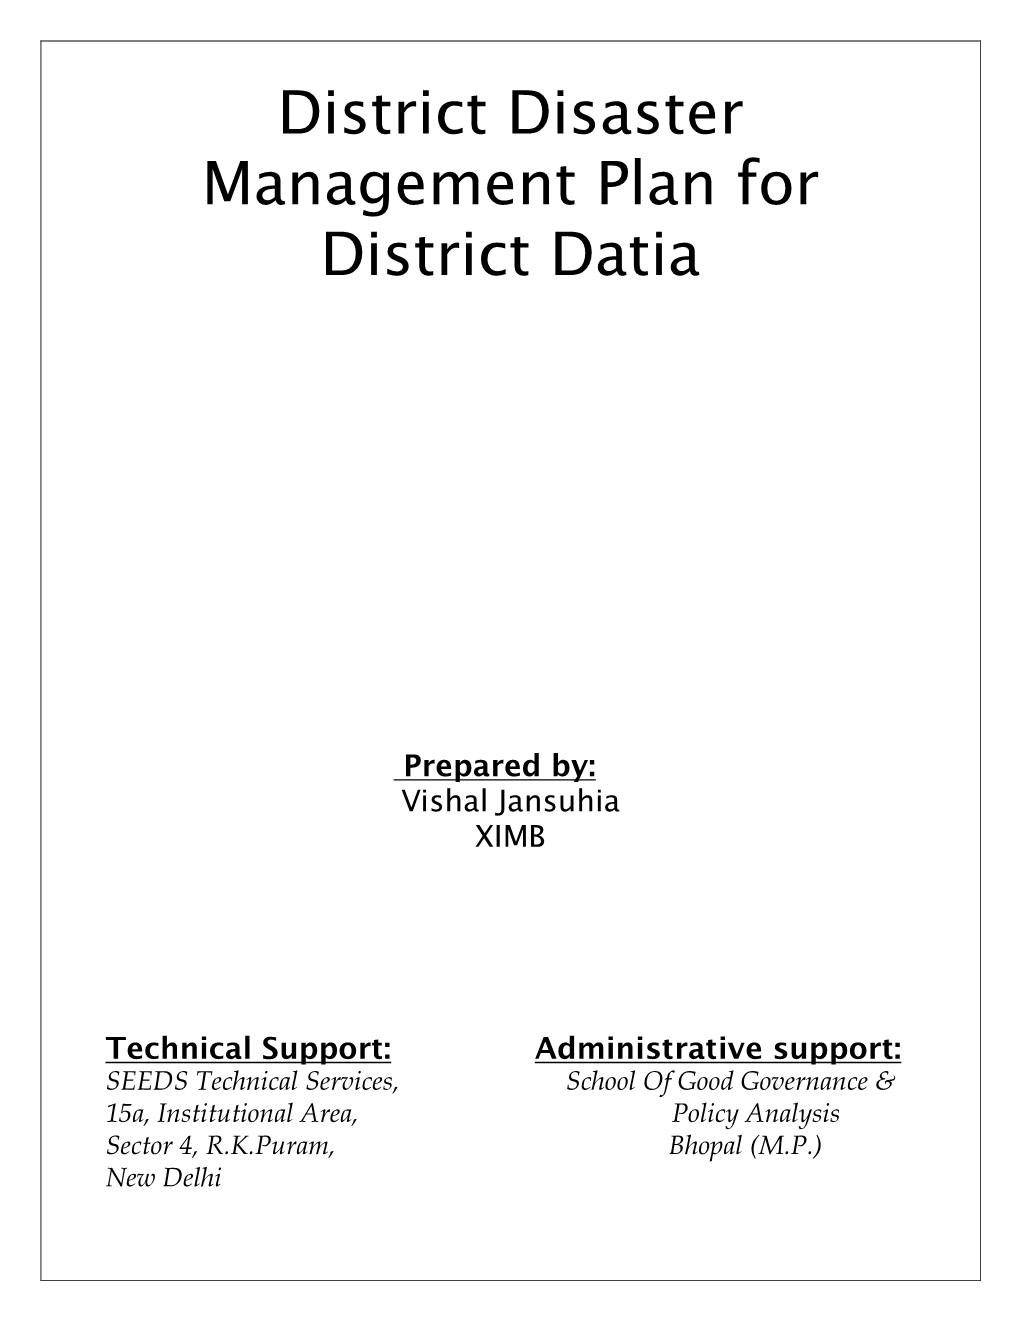 District Disaster Management Plan for District Datia